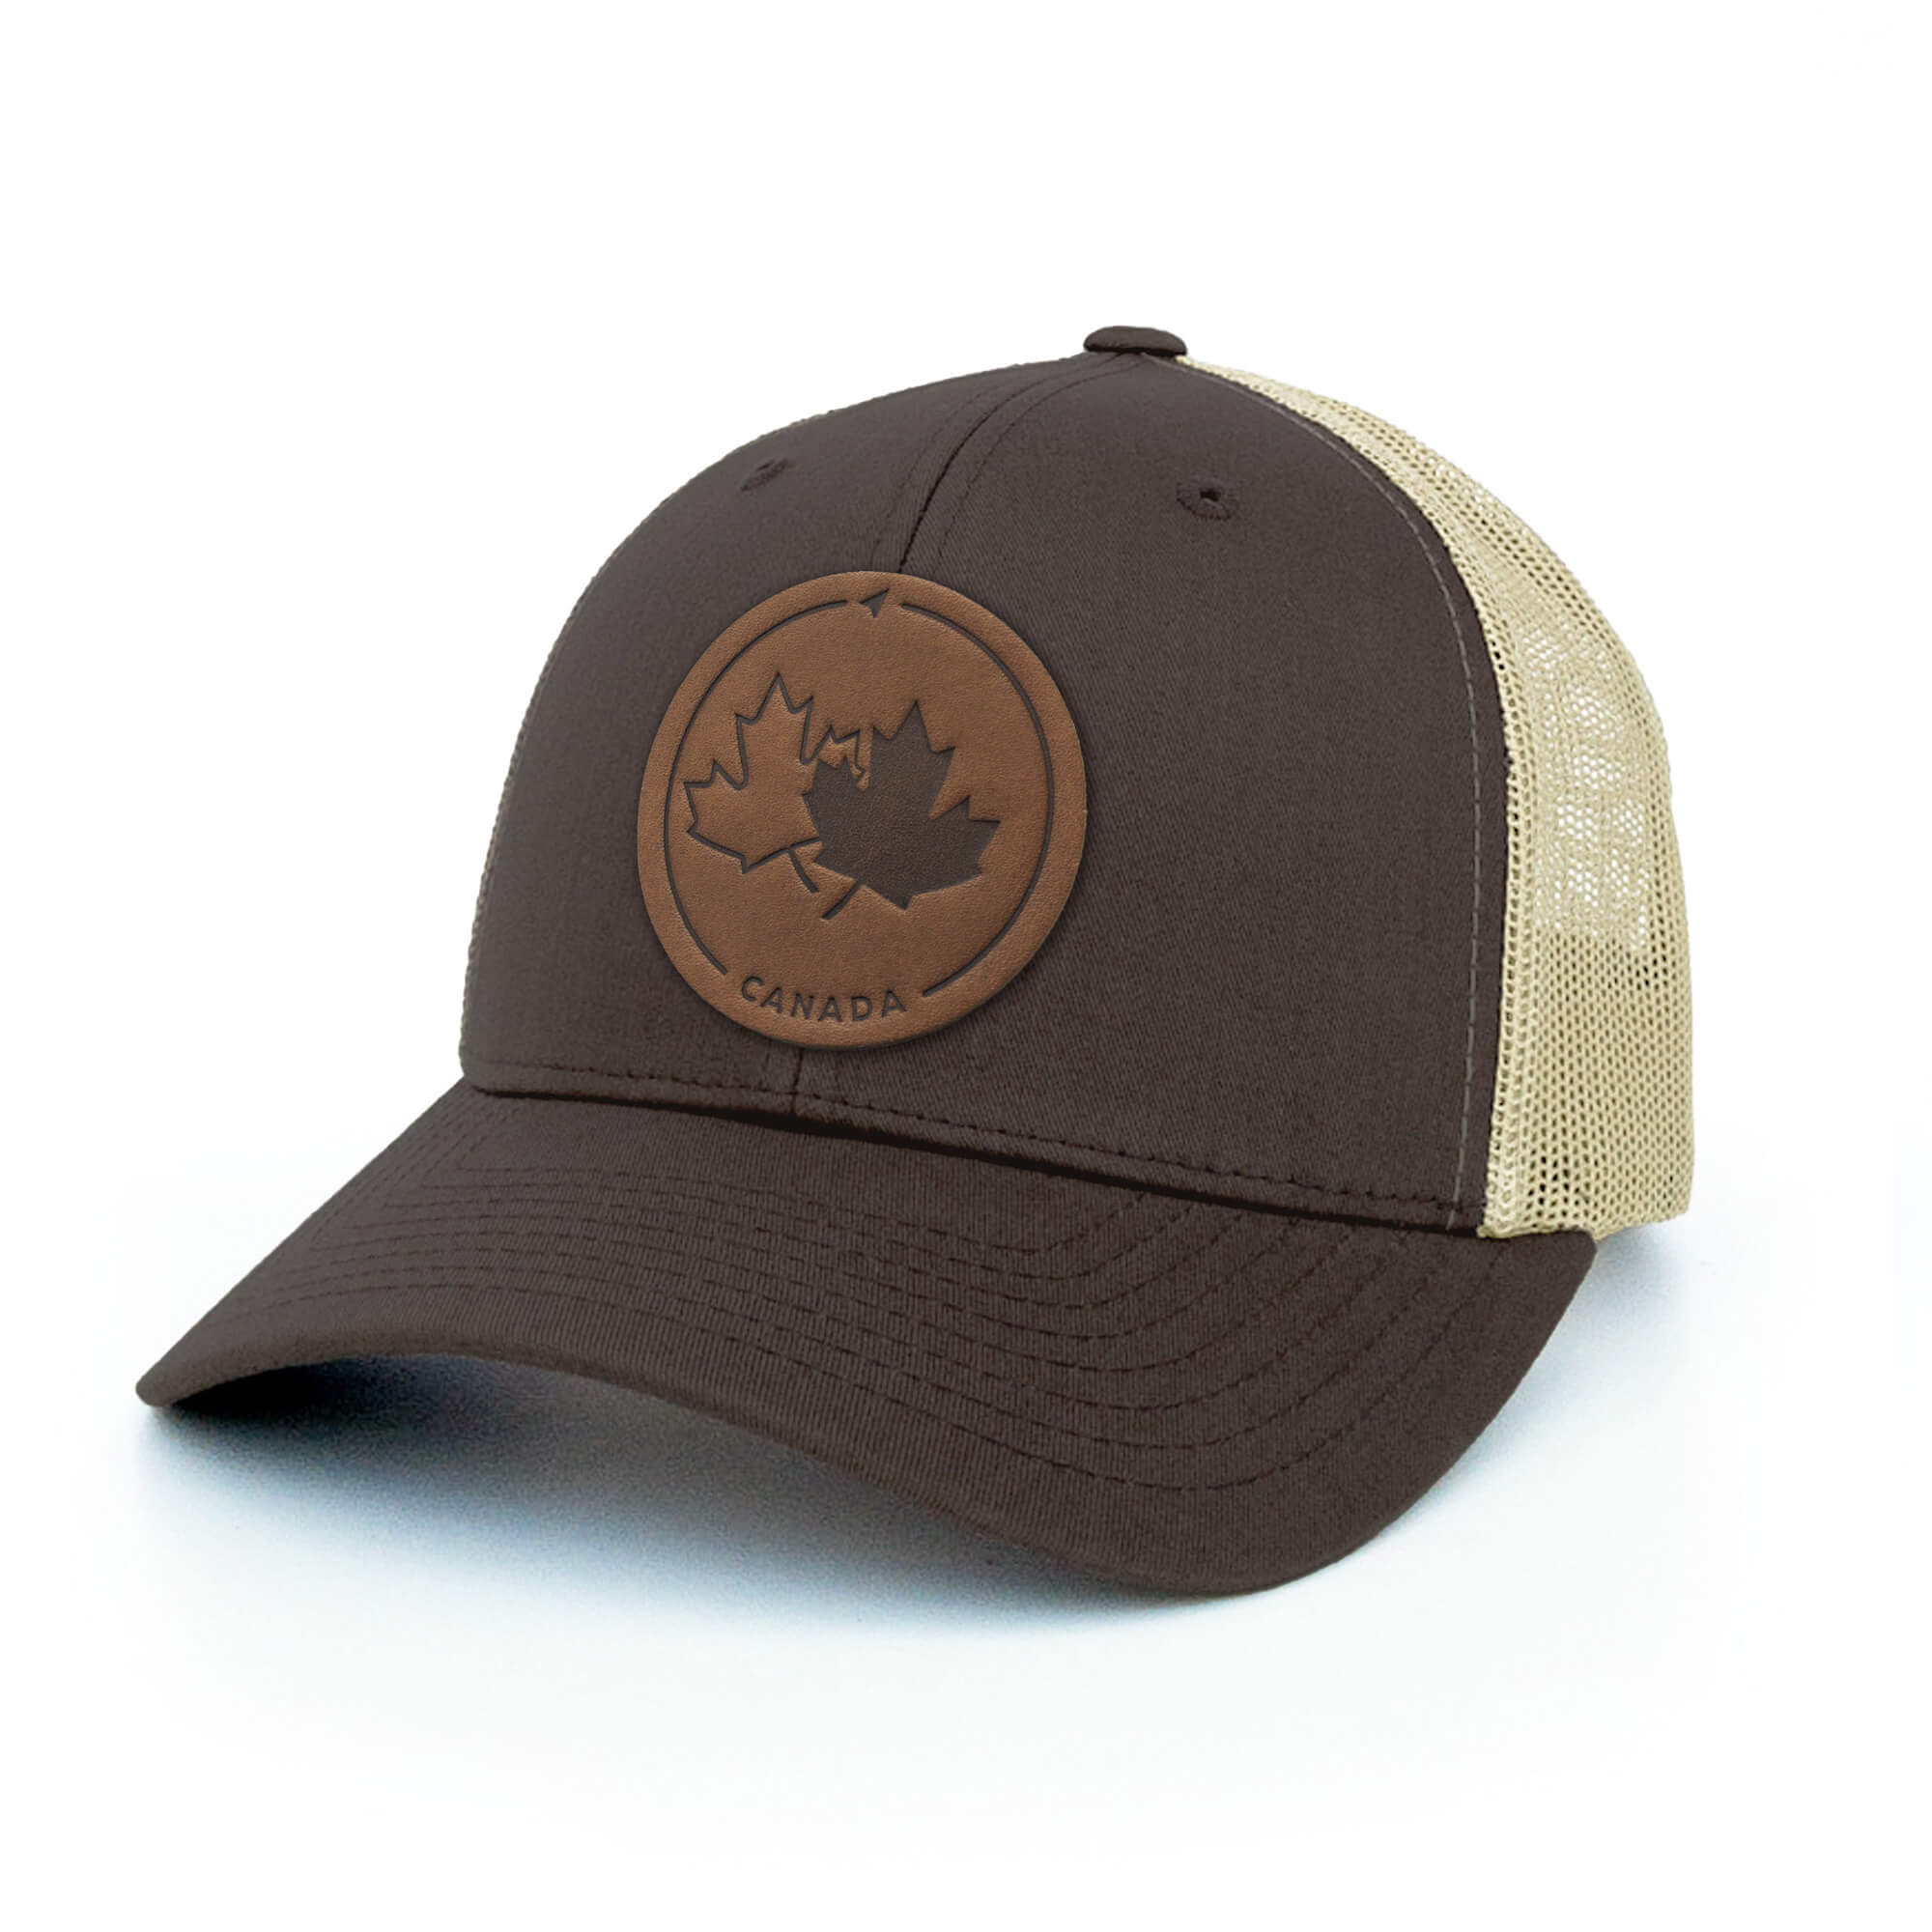 Brown and khaki trucker hat with full-grain leather patch of Canada Strong and Free | BLACK-002-010, CHARC-002-010, NAVY-002-010, HGREY-002-010, MOSS-002-010, BROWN-002-010, RED-002-010